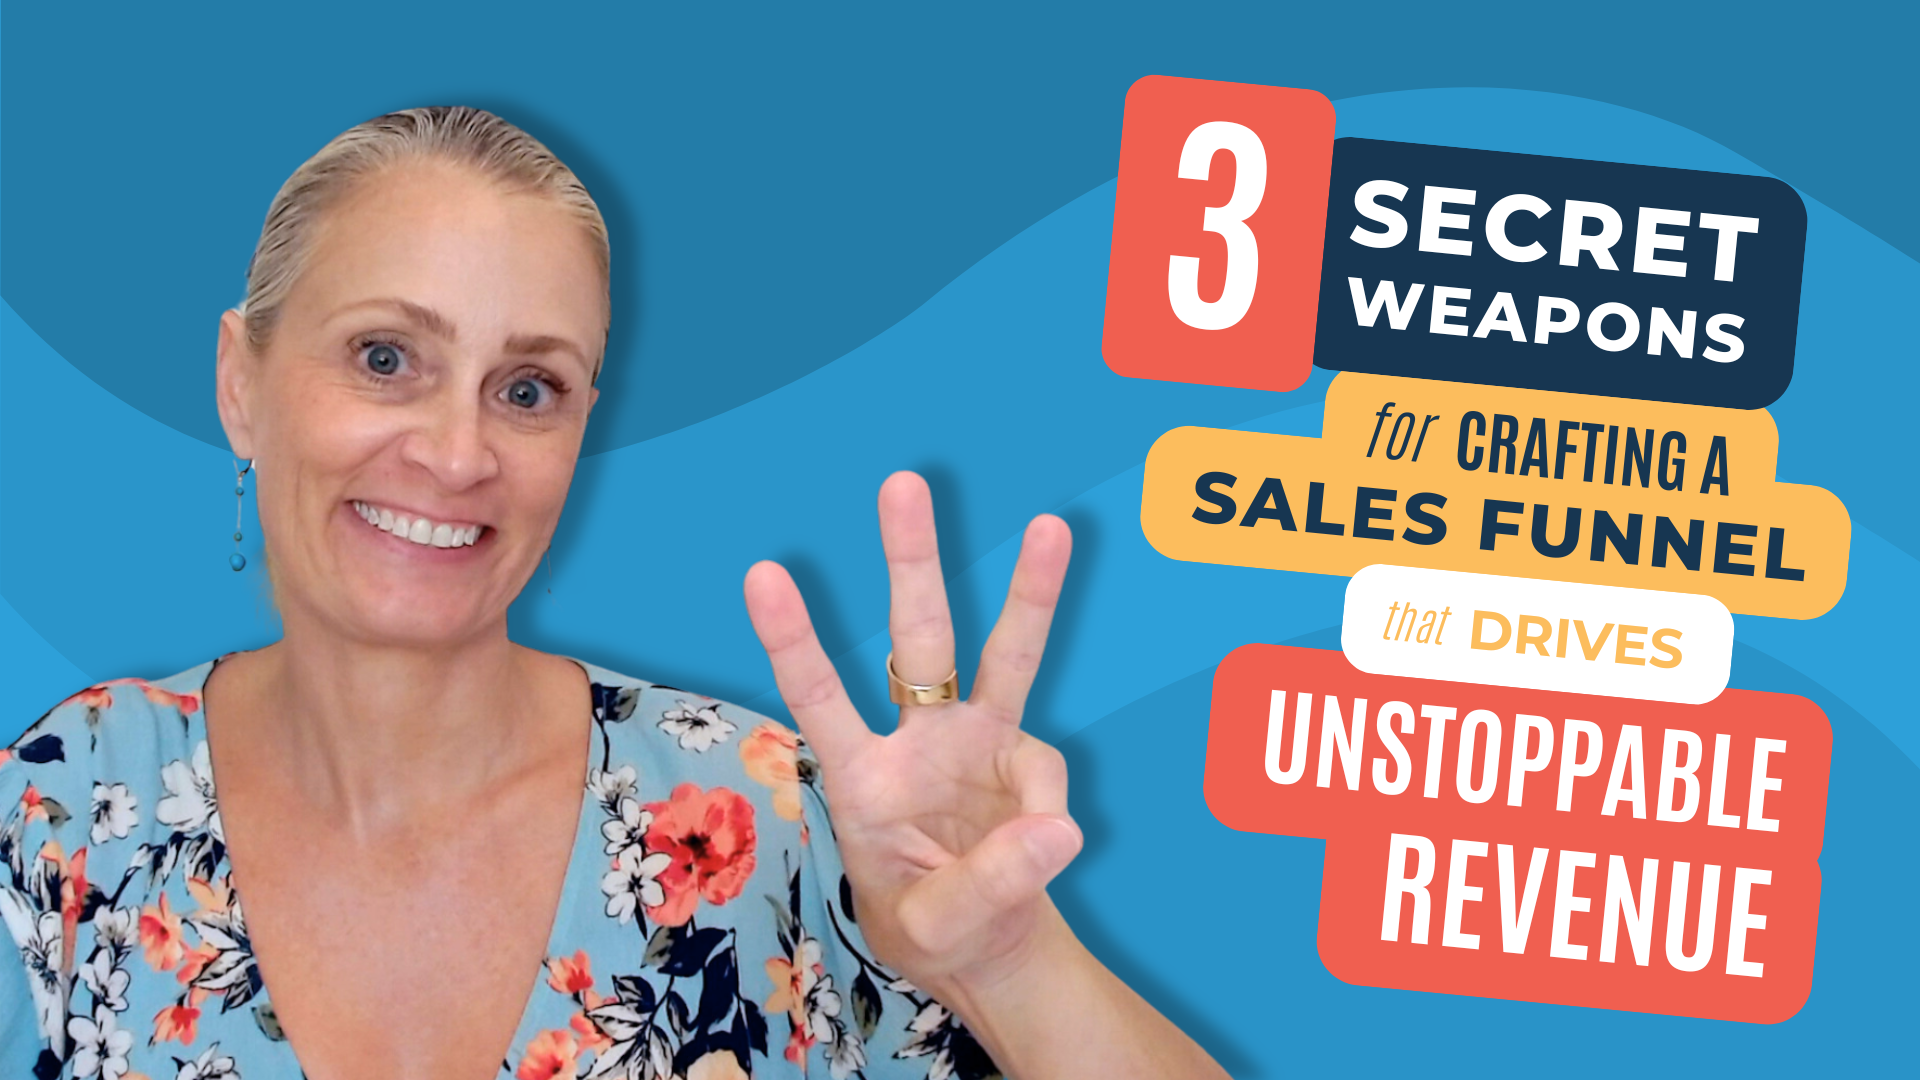 The 3 Secret Weapons for Crafting a Sales Funnel that Drives Unstoppable Revenue